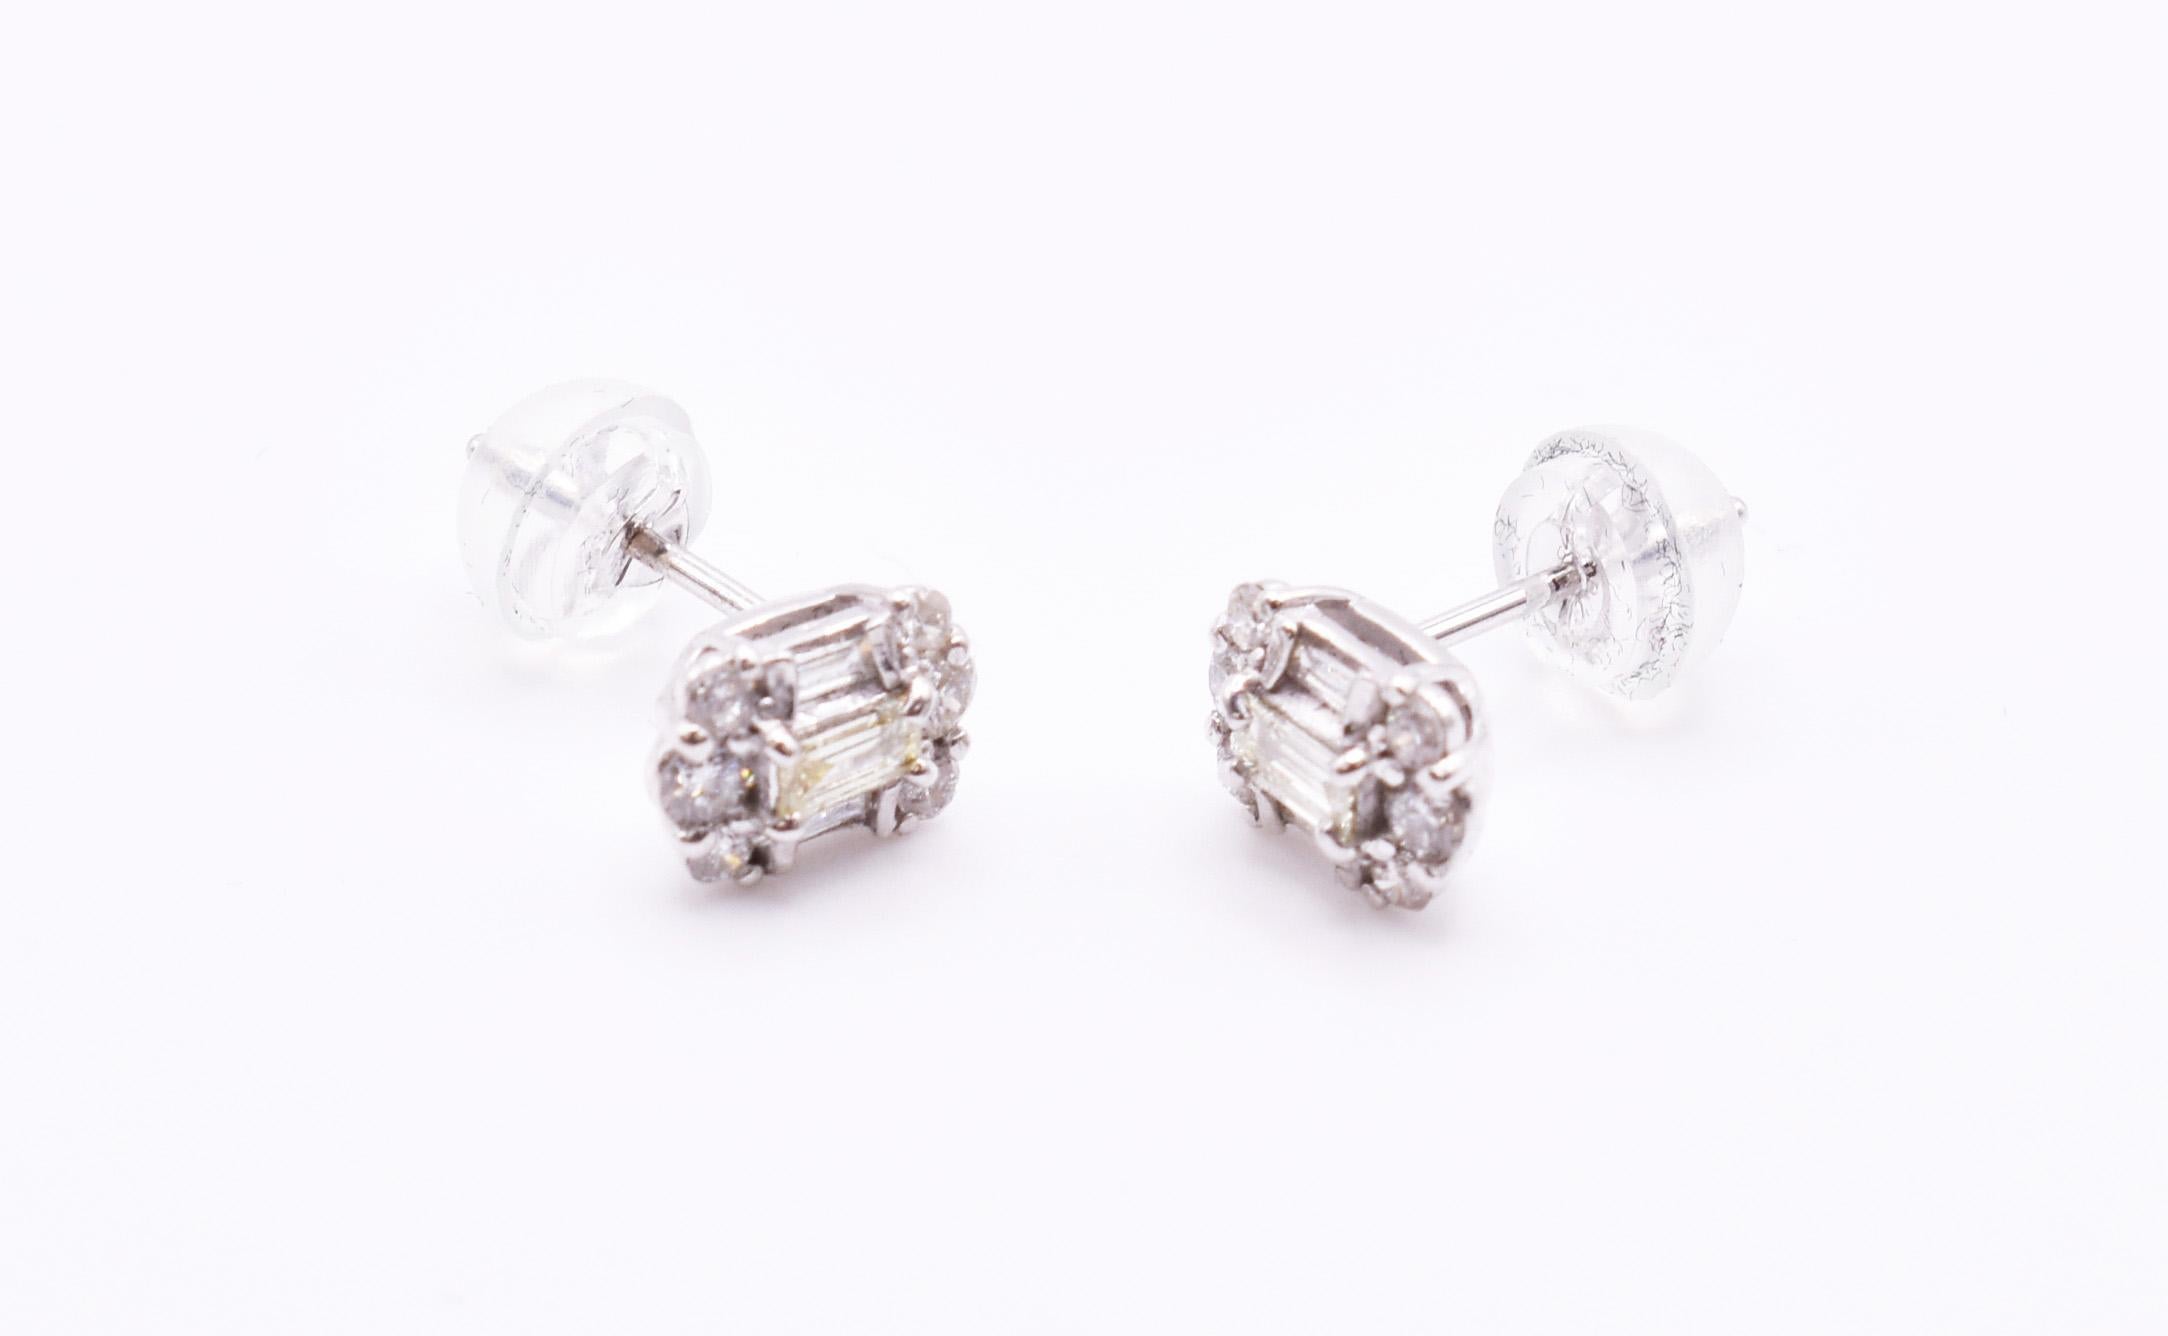 For sale is a nice pair of 18k white gold diamond earrings, each featuring three baguette cut diamonds, with a further 6 round cut diamonds. Diamonds = 0.42ct H colour SI clarity